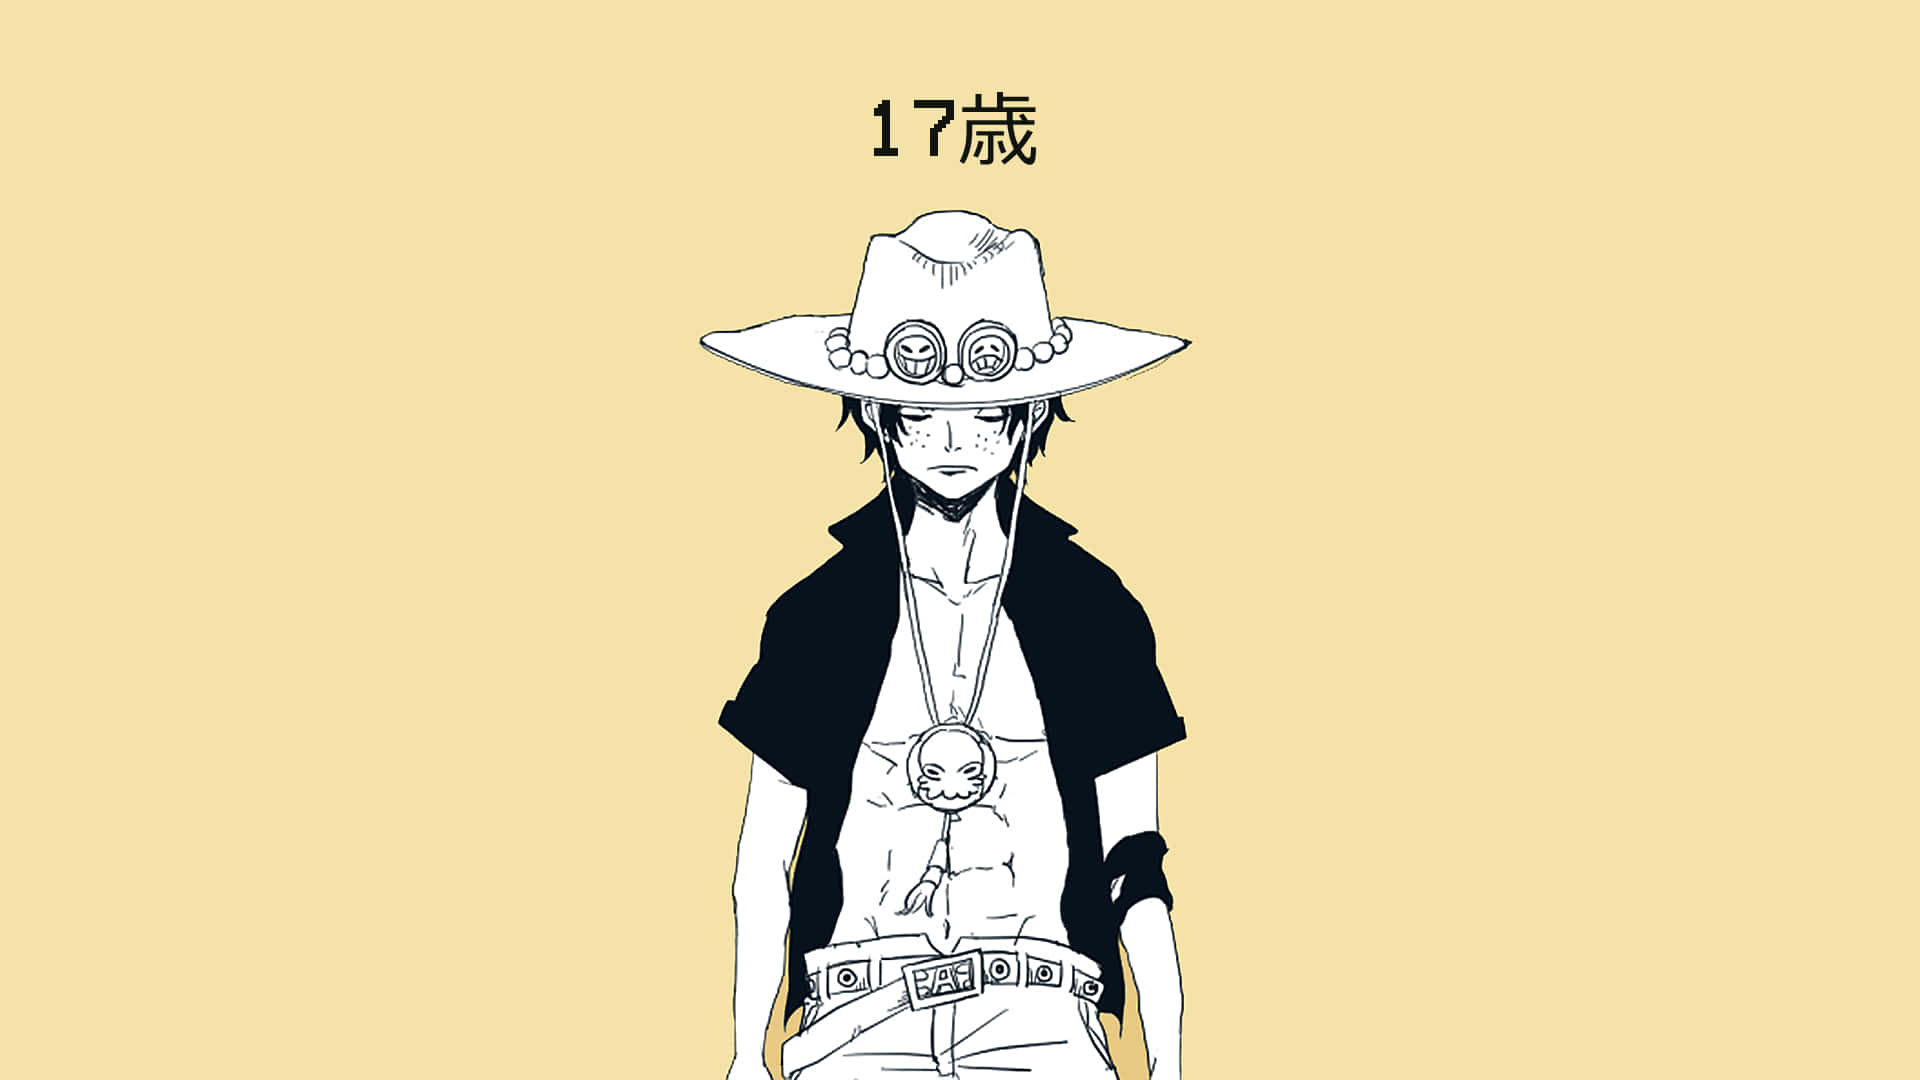 Portgas D Ace, the Captain of the Whitebeard Pirates Wallpaper